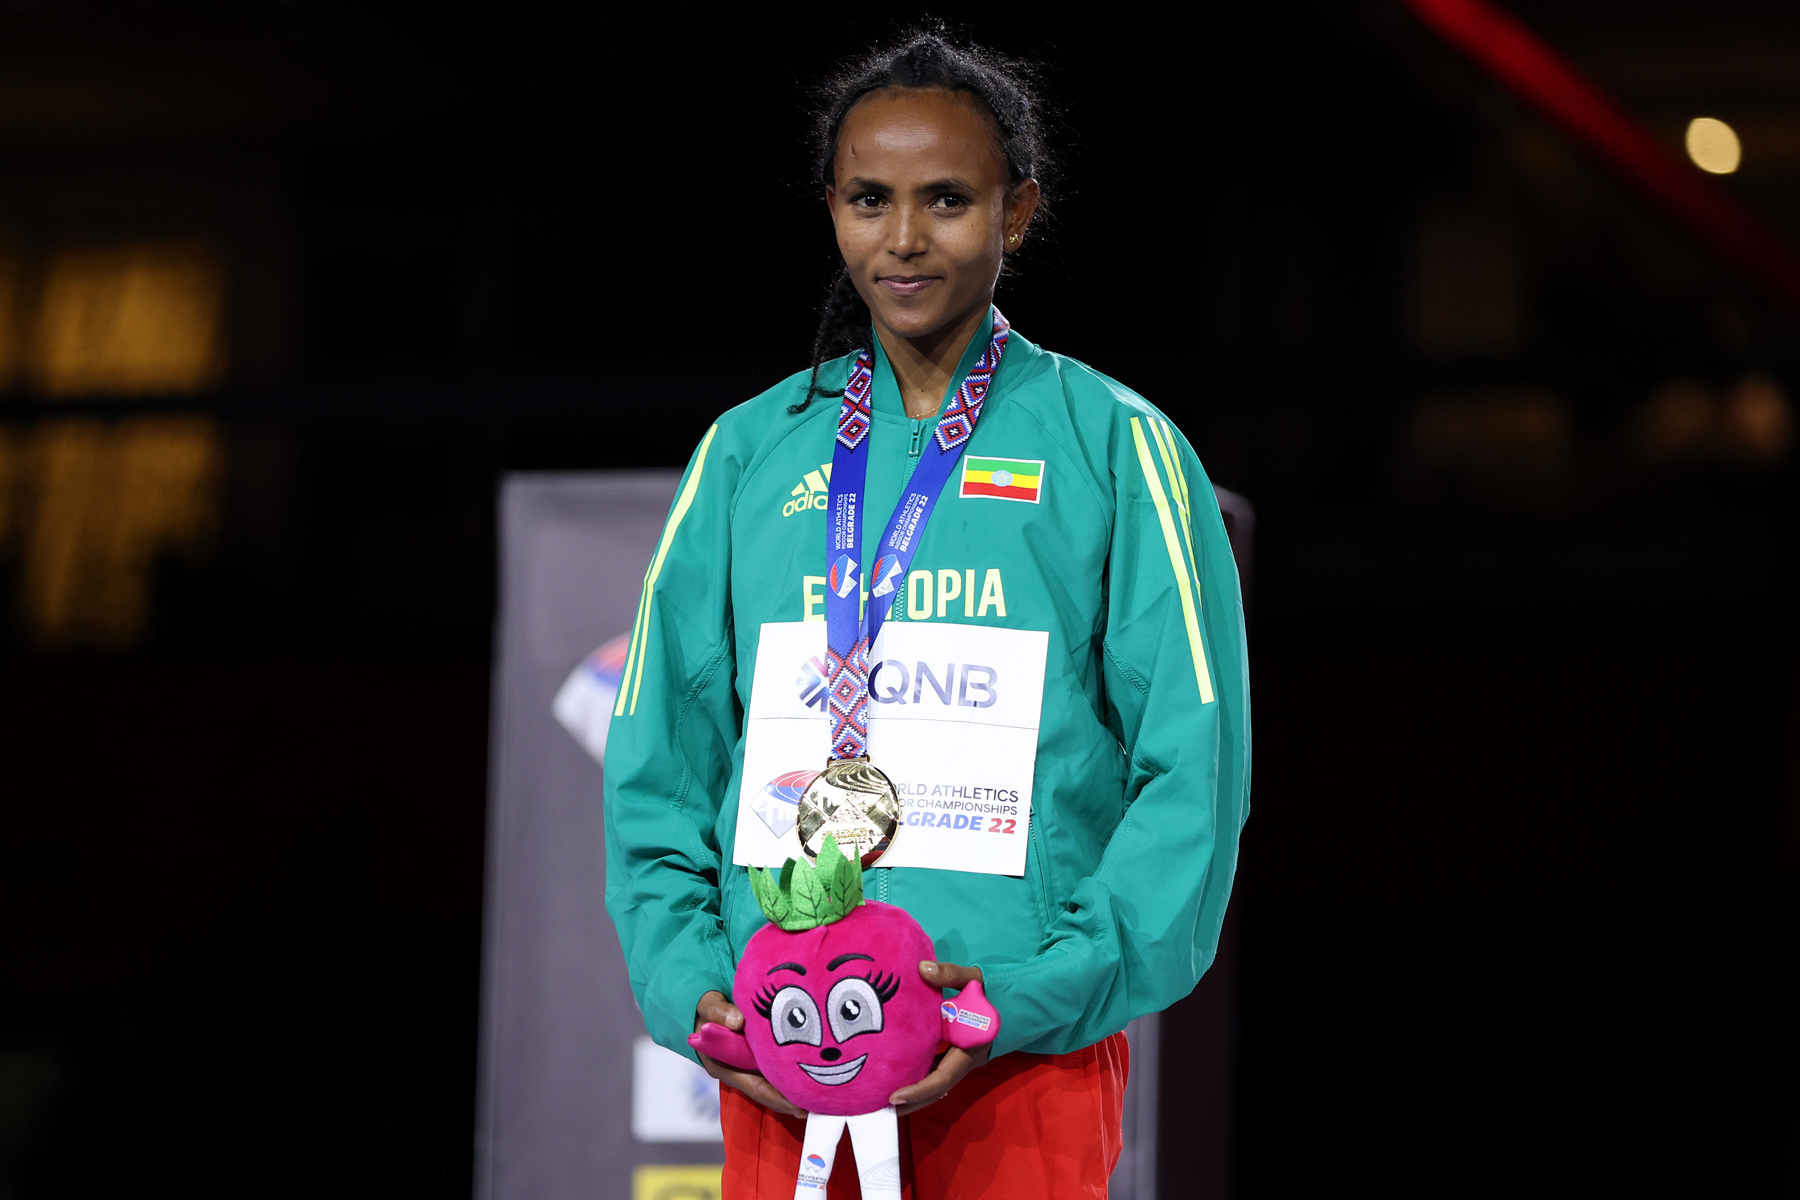 Ethiopian Guday Tsegay on the podium in Belgrade 22 / Credit: Getty Images for World Athletics